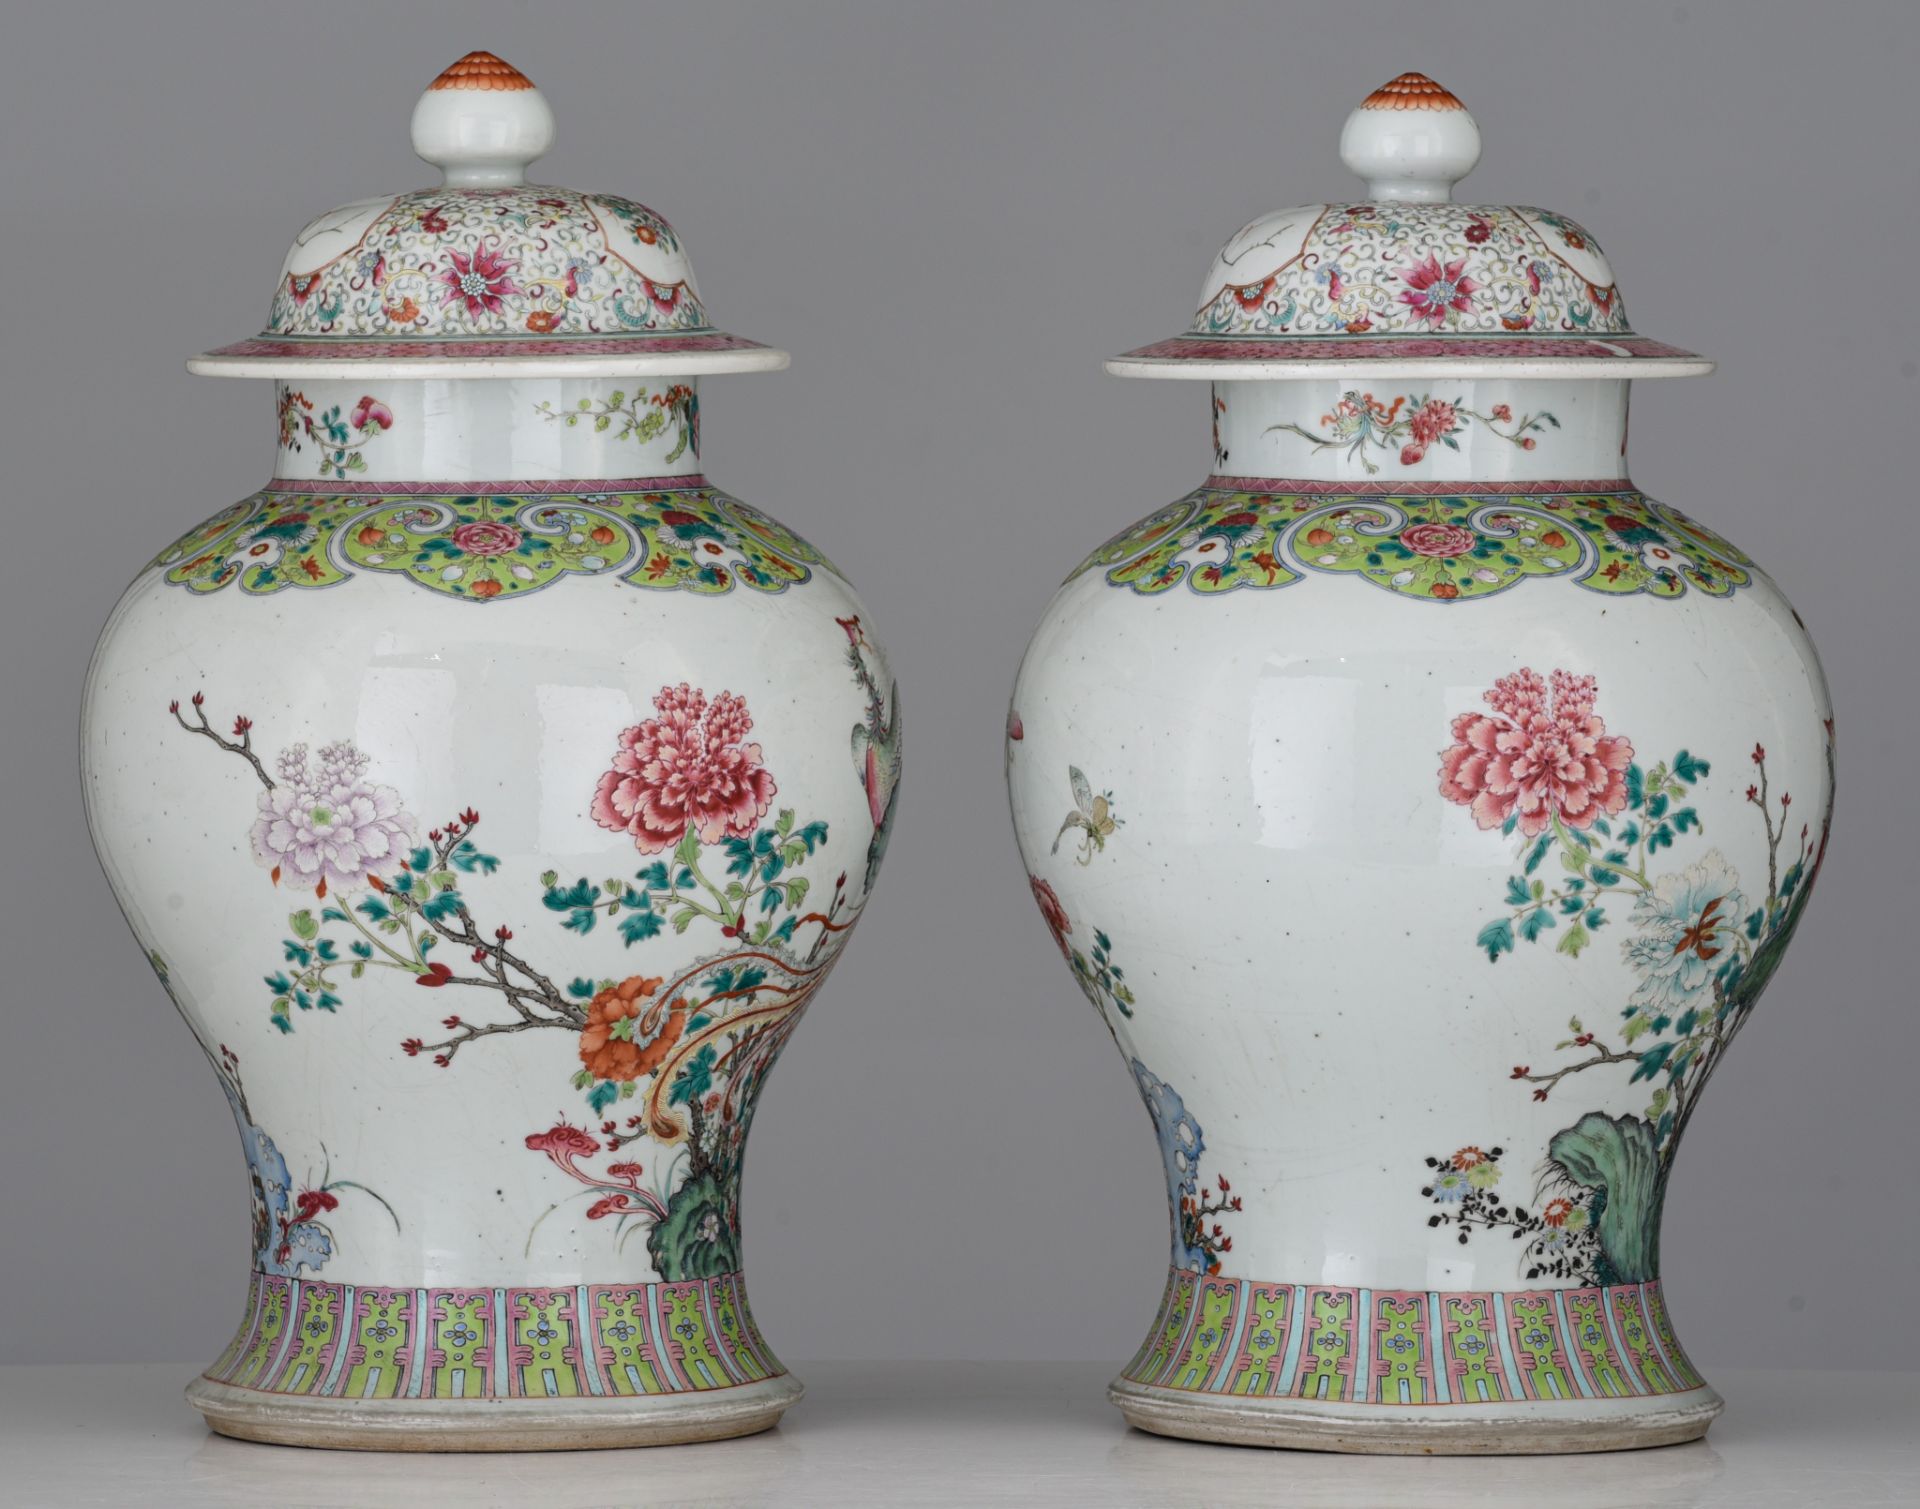 A fine pair of Chinese famille rose 'Phoenix' covered vases, 19thC, H 44,5 cm - Image 5 of 7